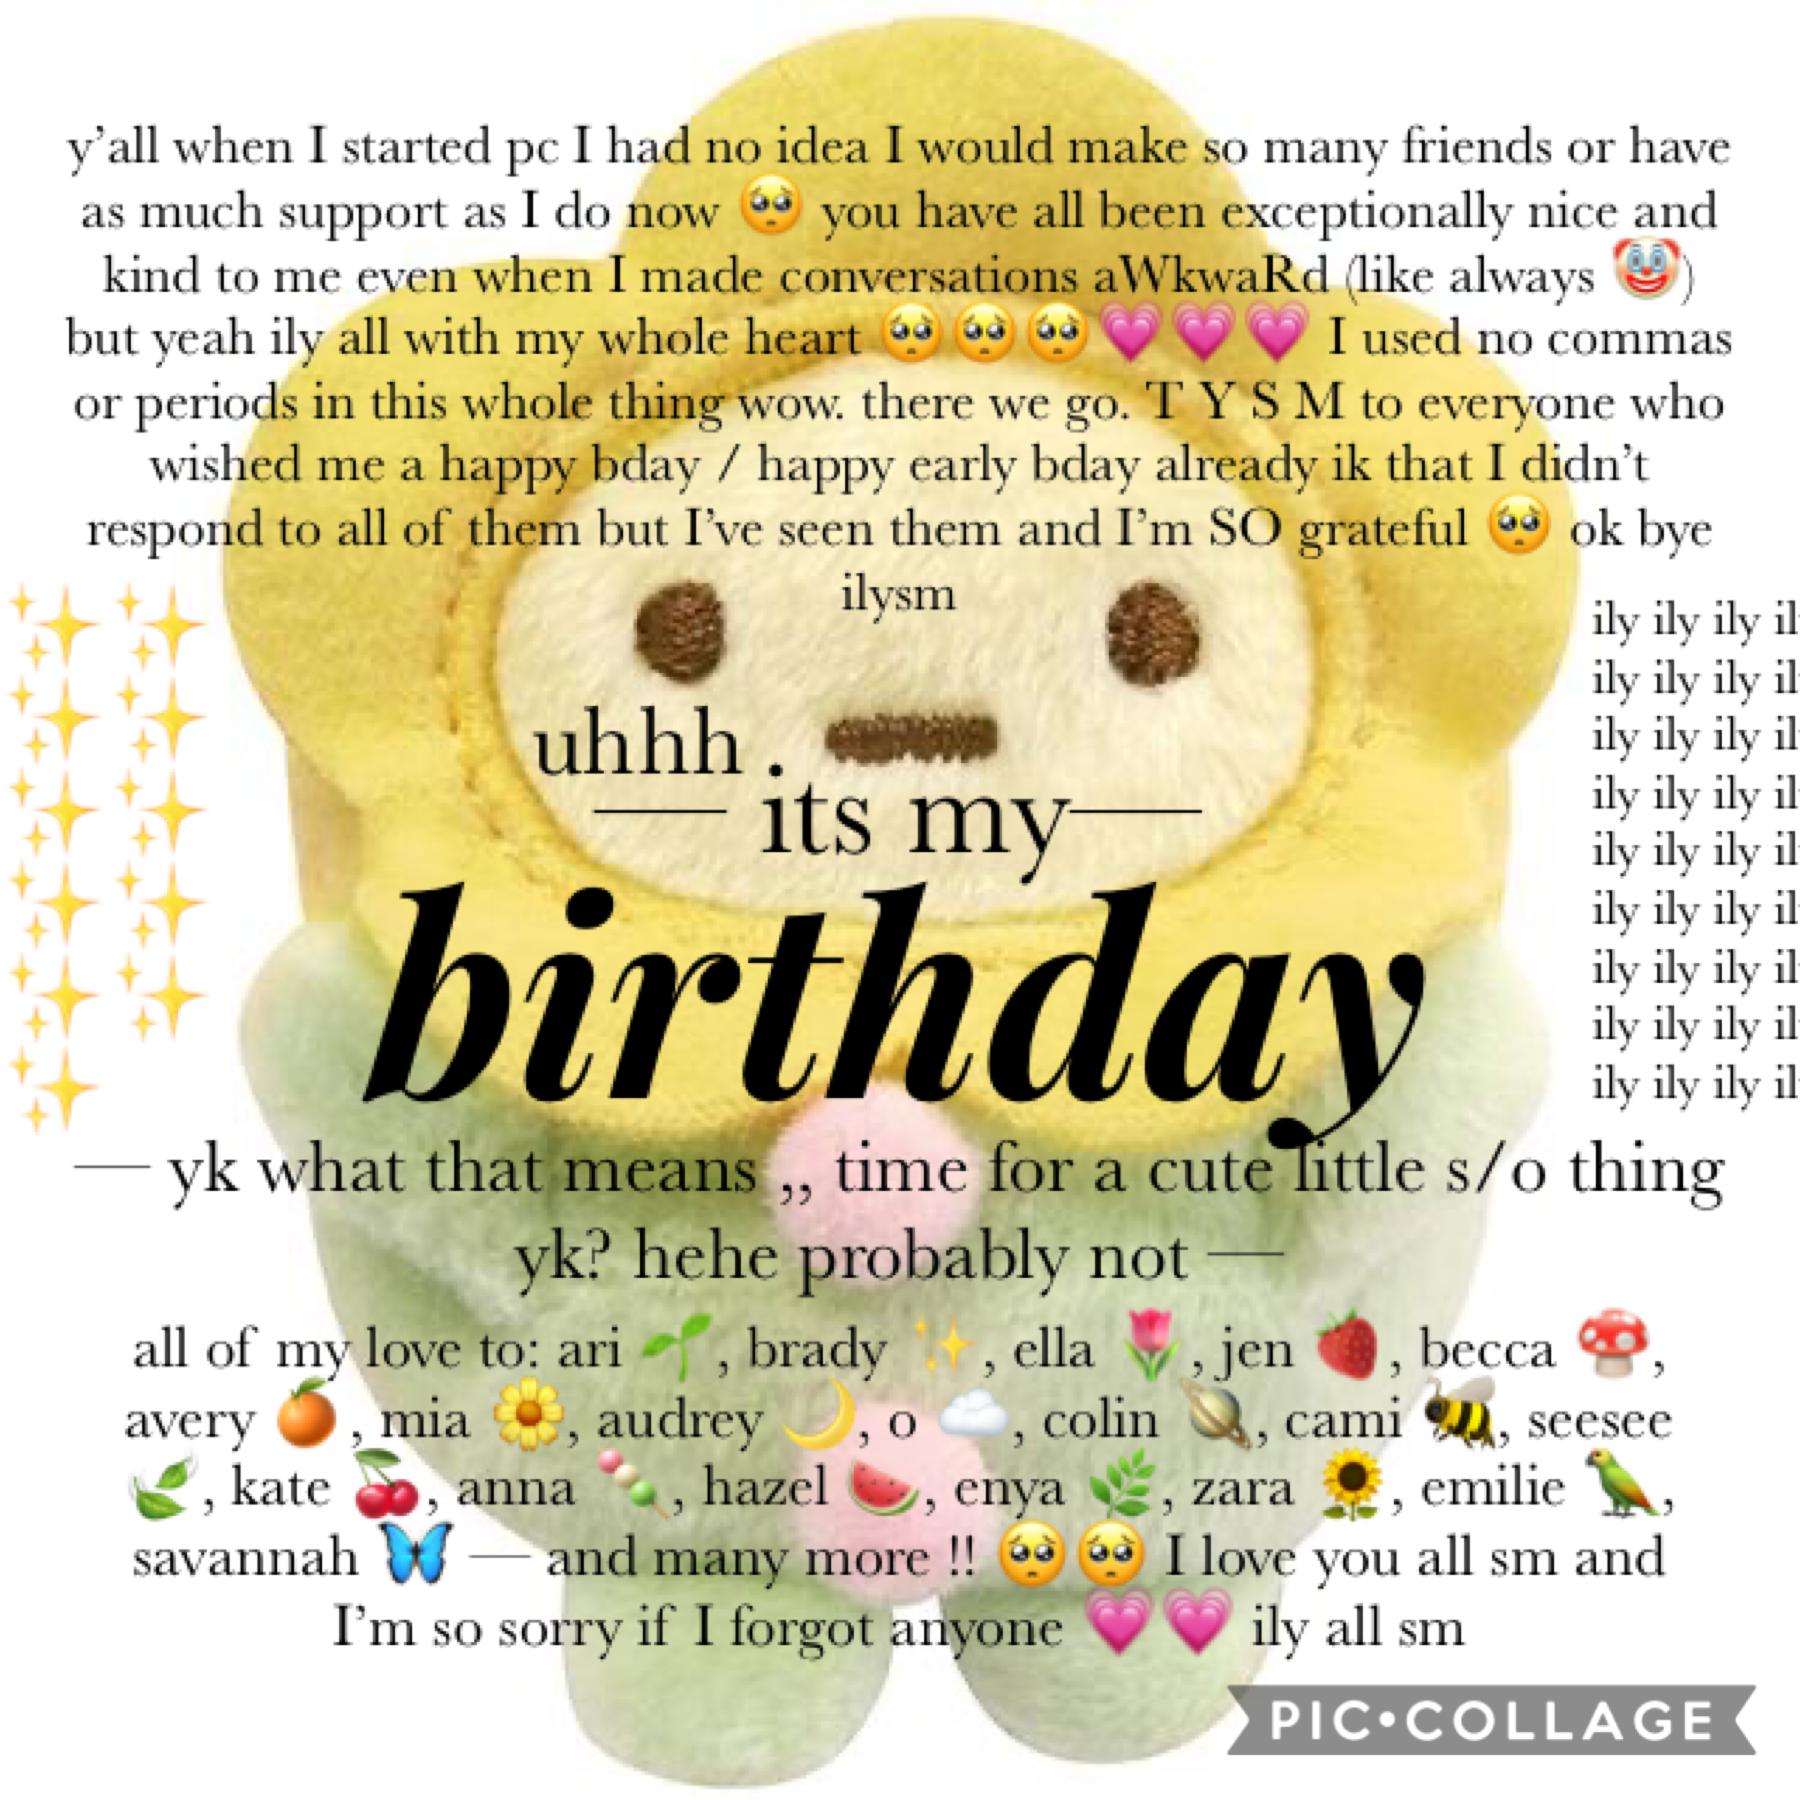 it’s officially my bday HARHAR 👁👁 hehe ily all SO MUCH LIKE AHAHAJ 🥺🥺🥺🥺🥺🥺🥺🥺🥺 ok but like seriously I’m probably forgetting so many people and if I forgot you I’m so so so sorry I didn’t mean to okk lmk if I did 🤡